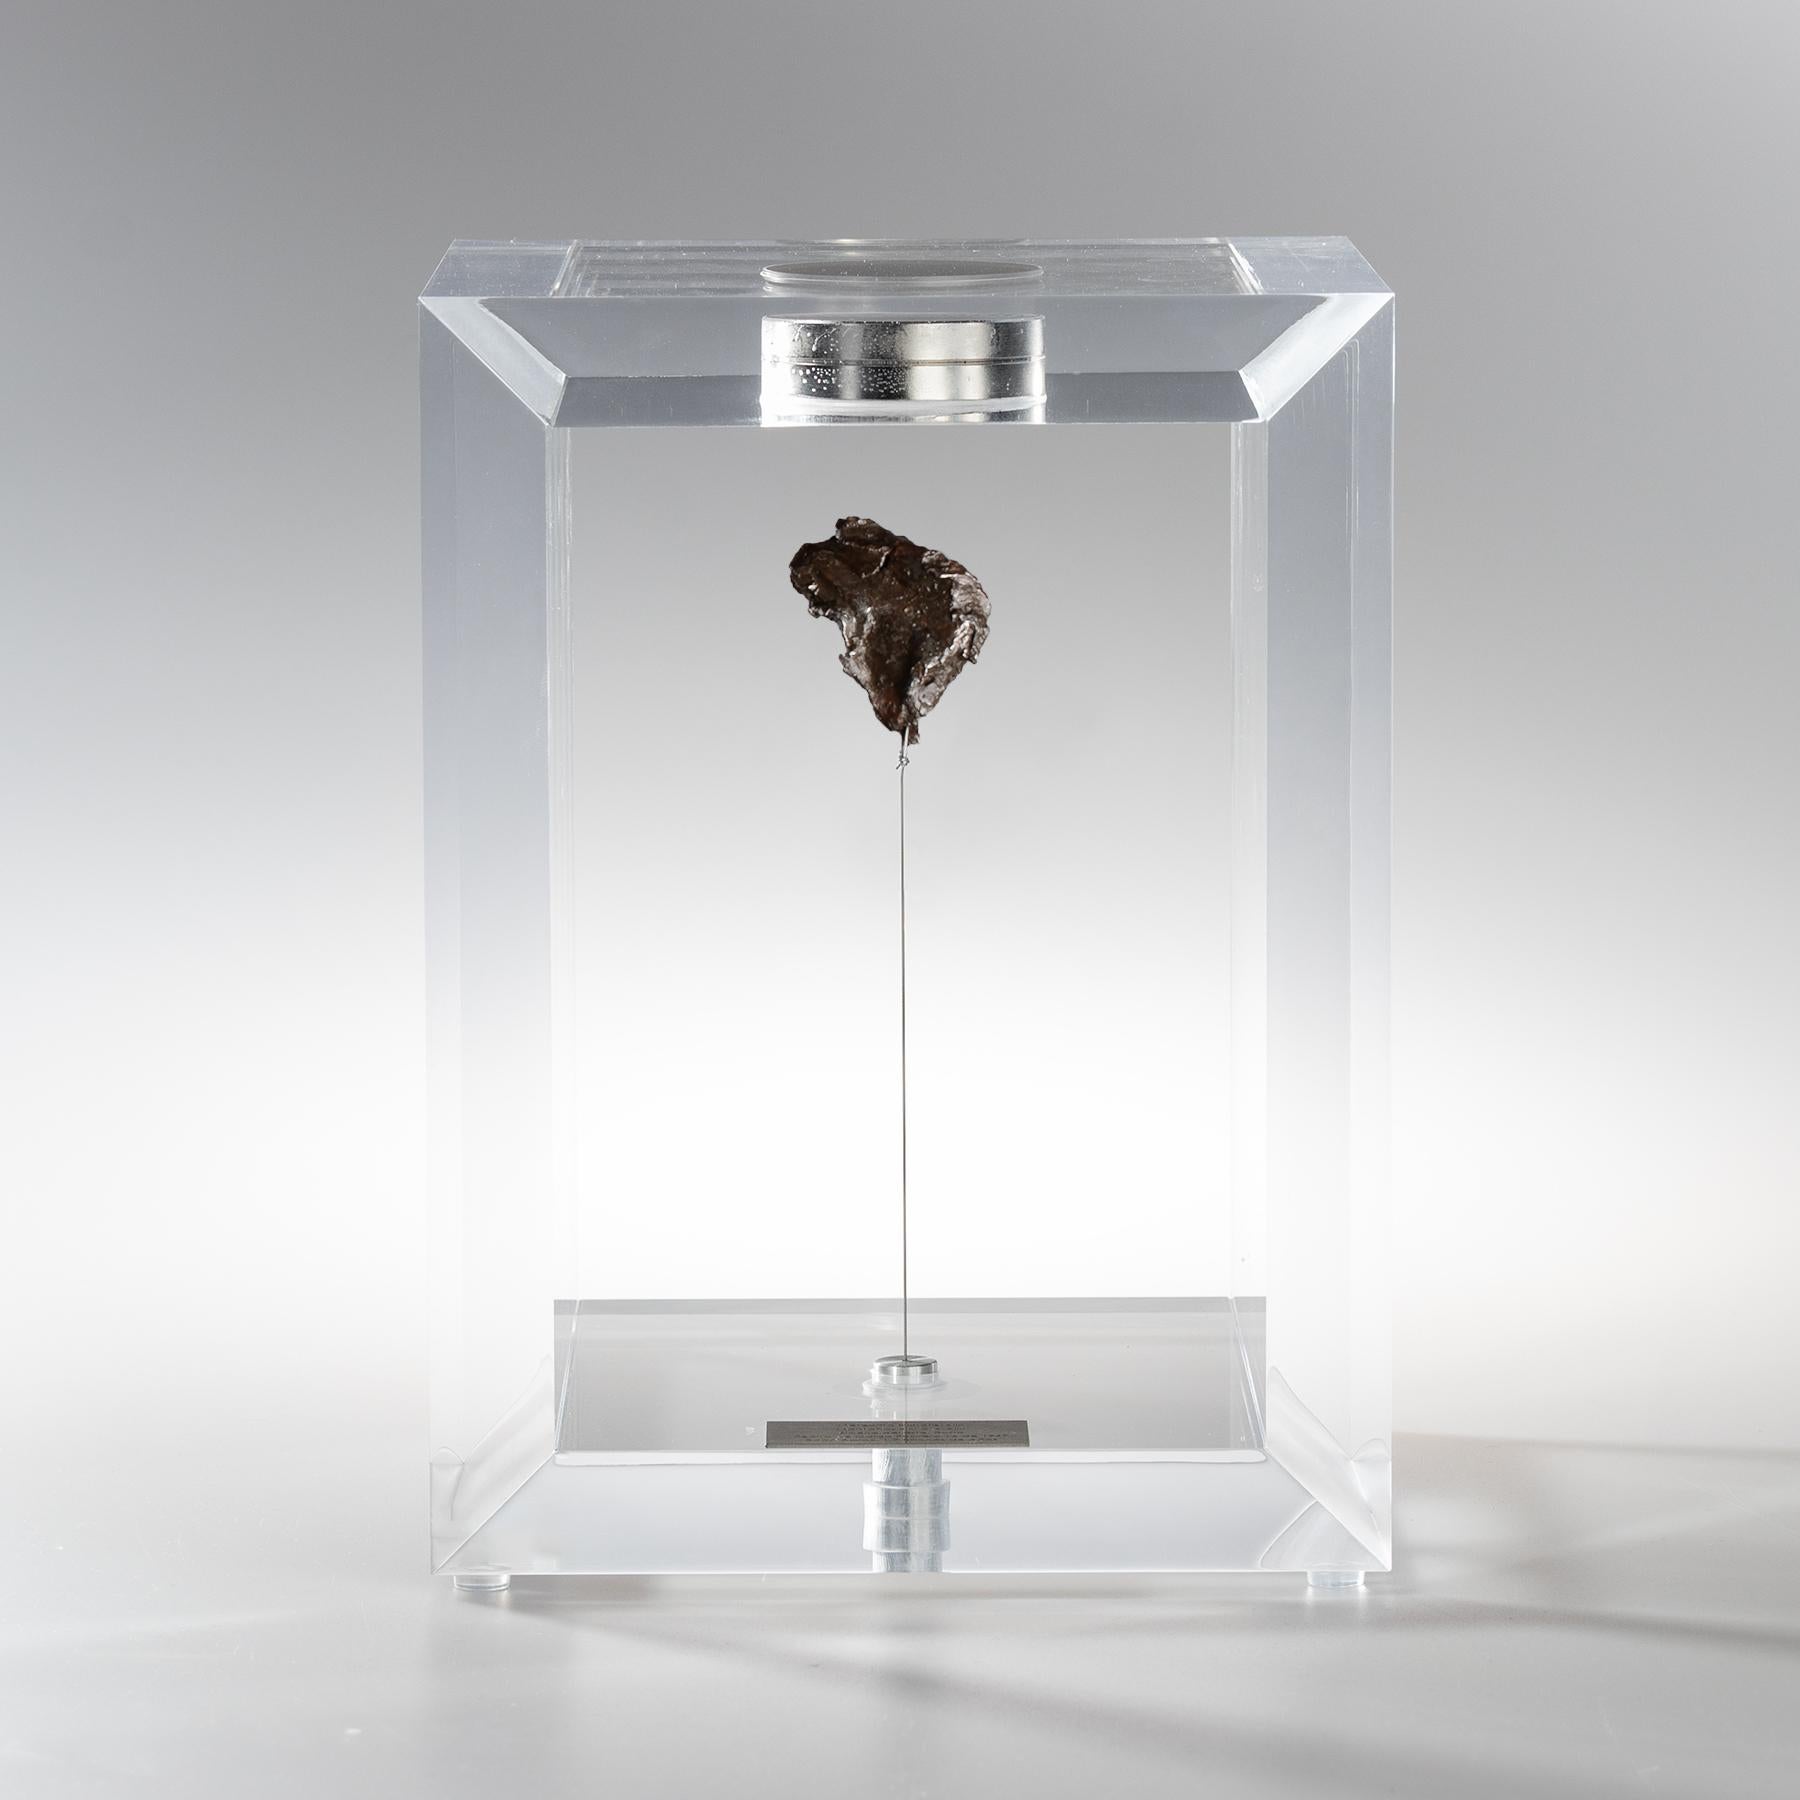 The “Space Box” was designed by Ernesto Duran, as a creative way to enhance the uniqueness of meteorites and could also be use as a decorative piece. Its an acrylic box with a magnet on top and a steel string pulling the Meteorite straight